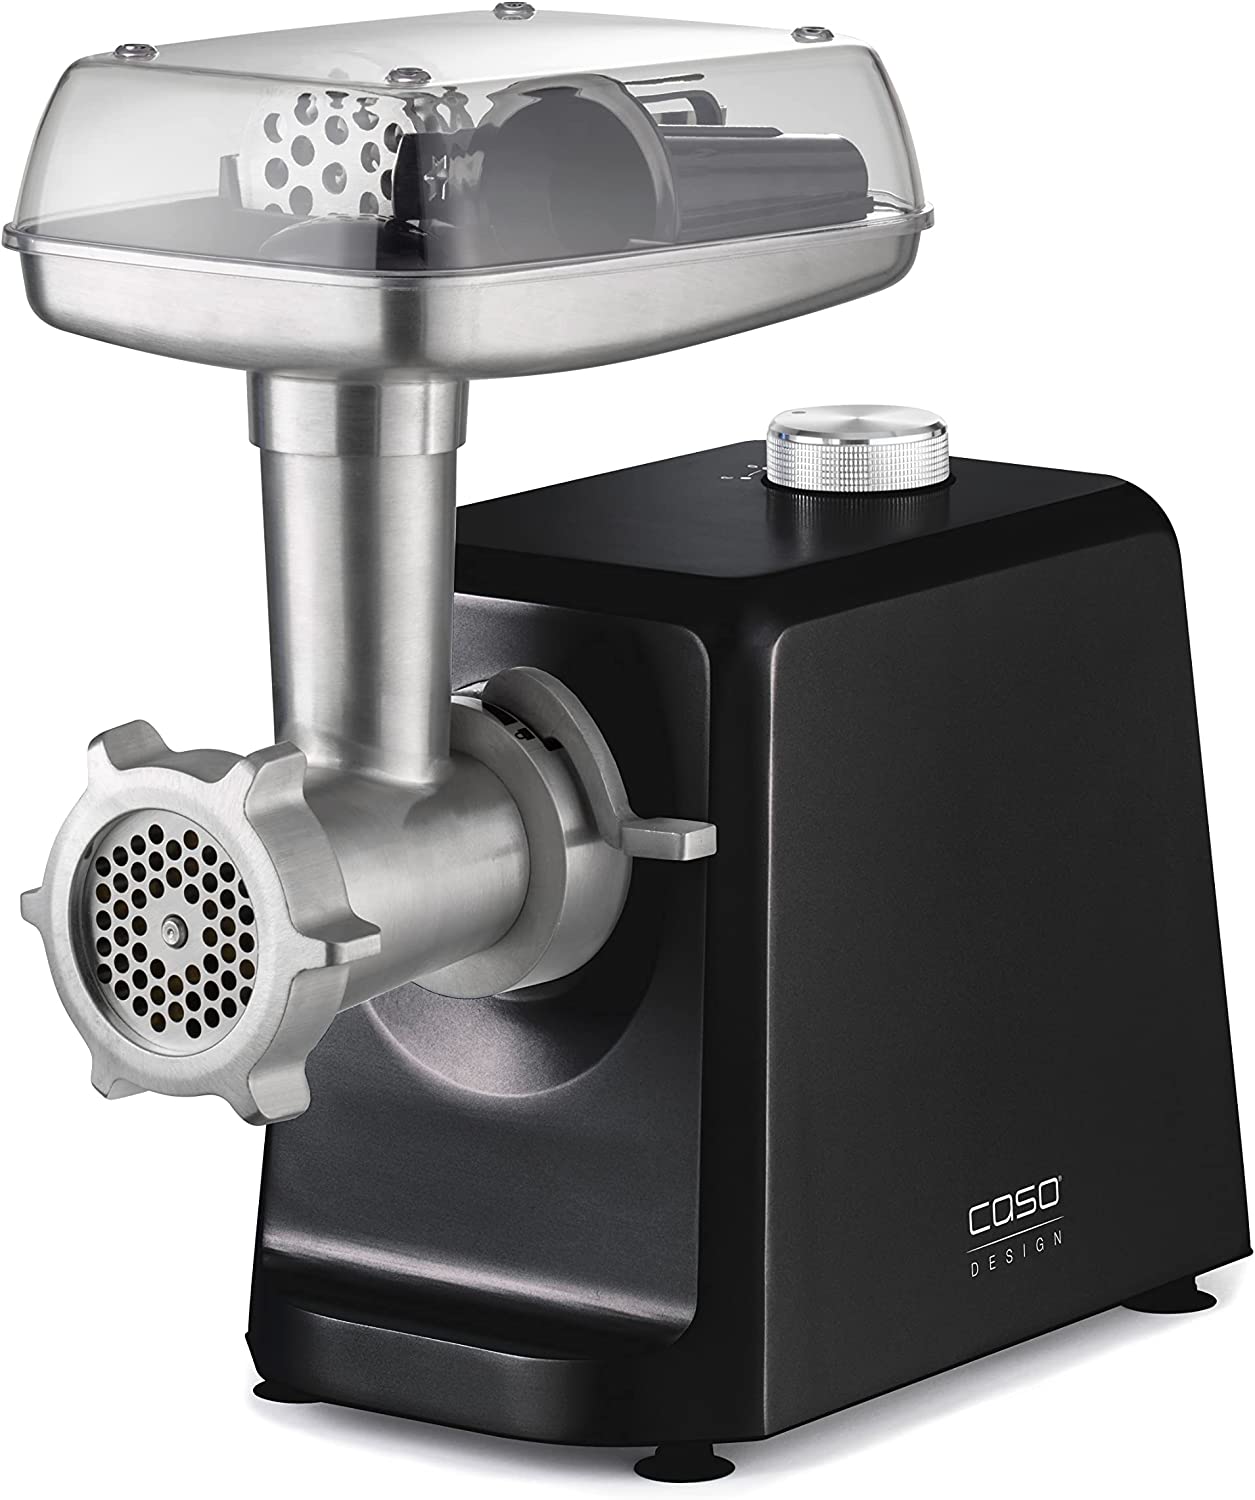 CASO FW 2500 Black, Meat Mincer with Powerful 2500 Watt Motor, Durable Titanium Blade, Return Function, Extensive Accessories Including Burger Press, Low-Noise DC Motor